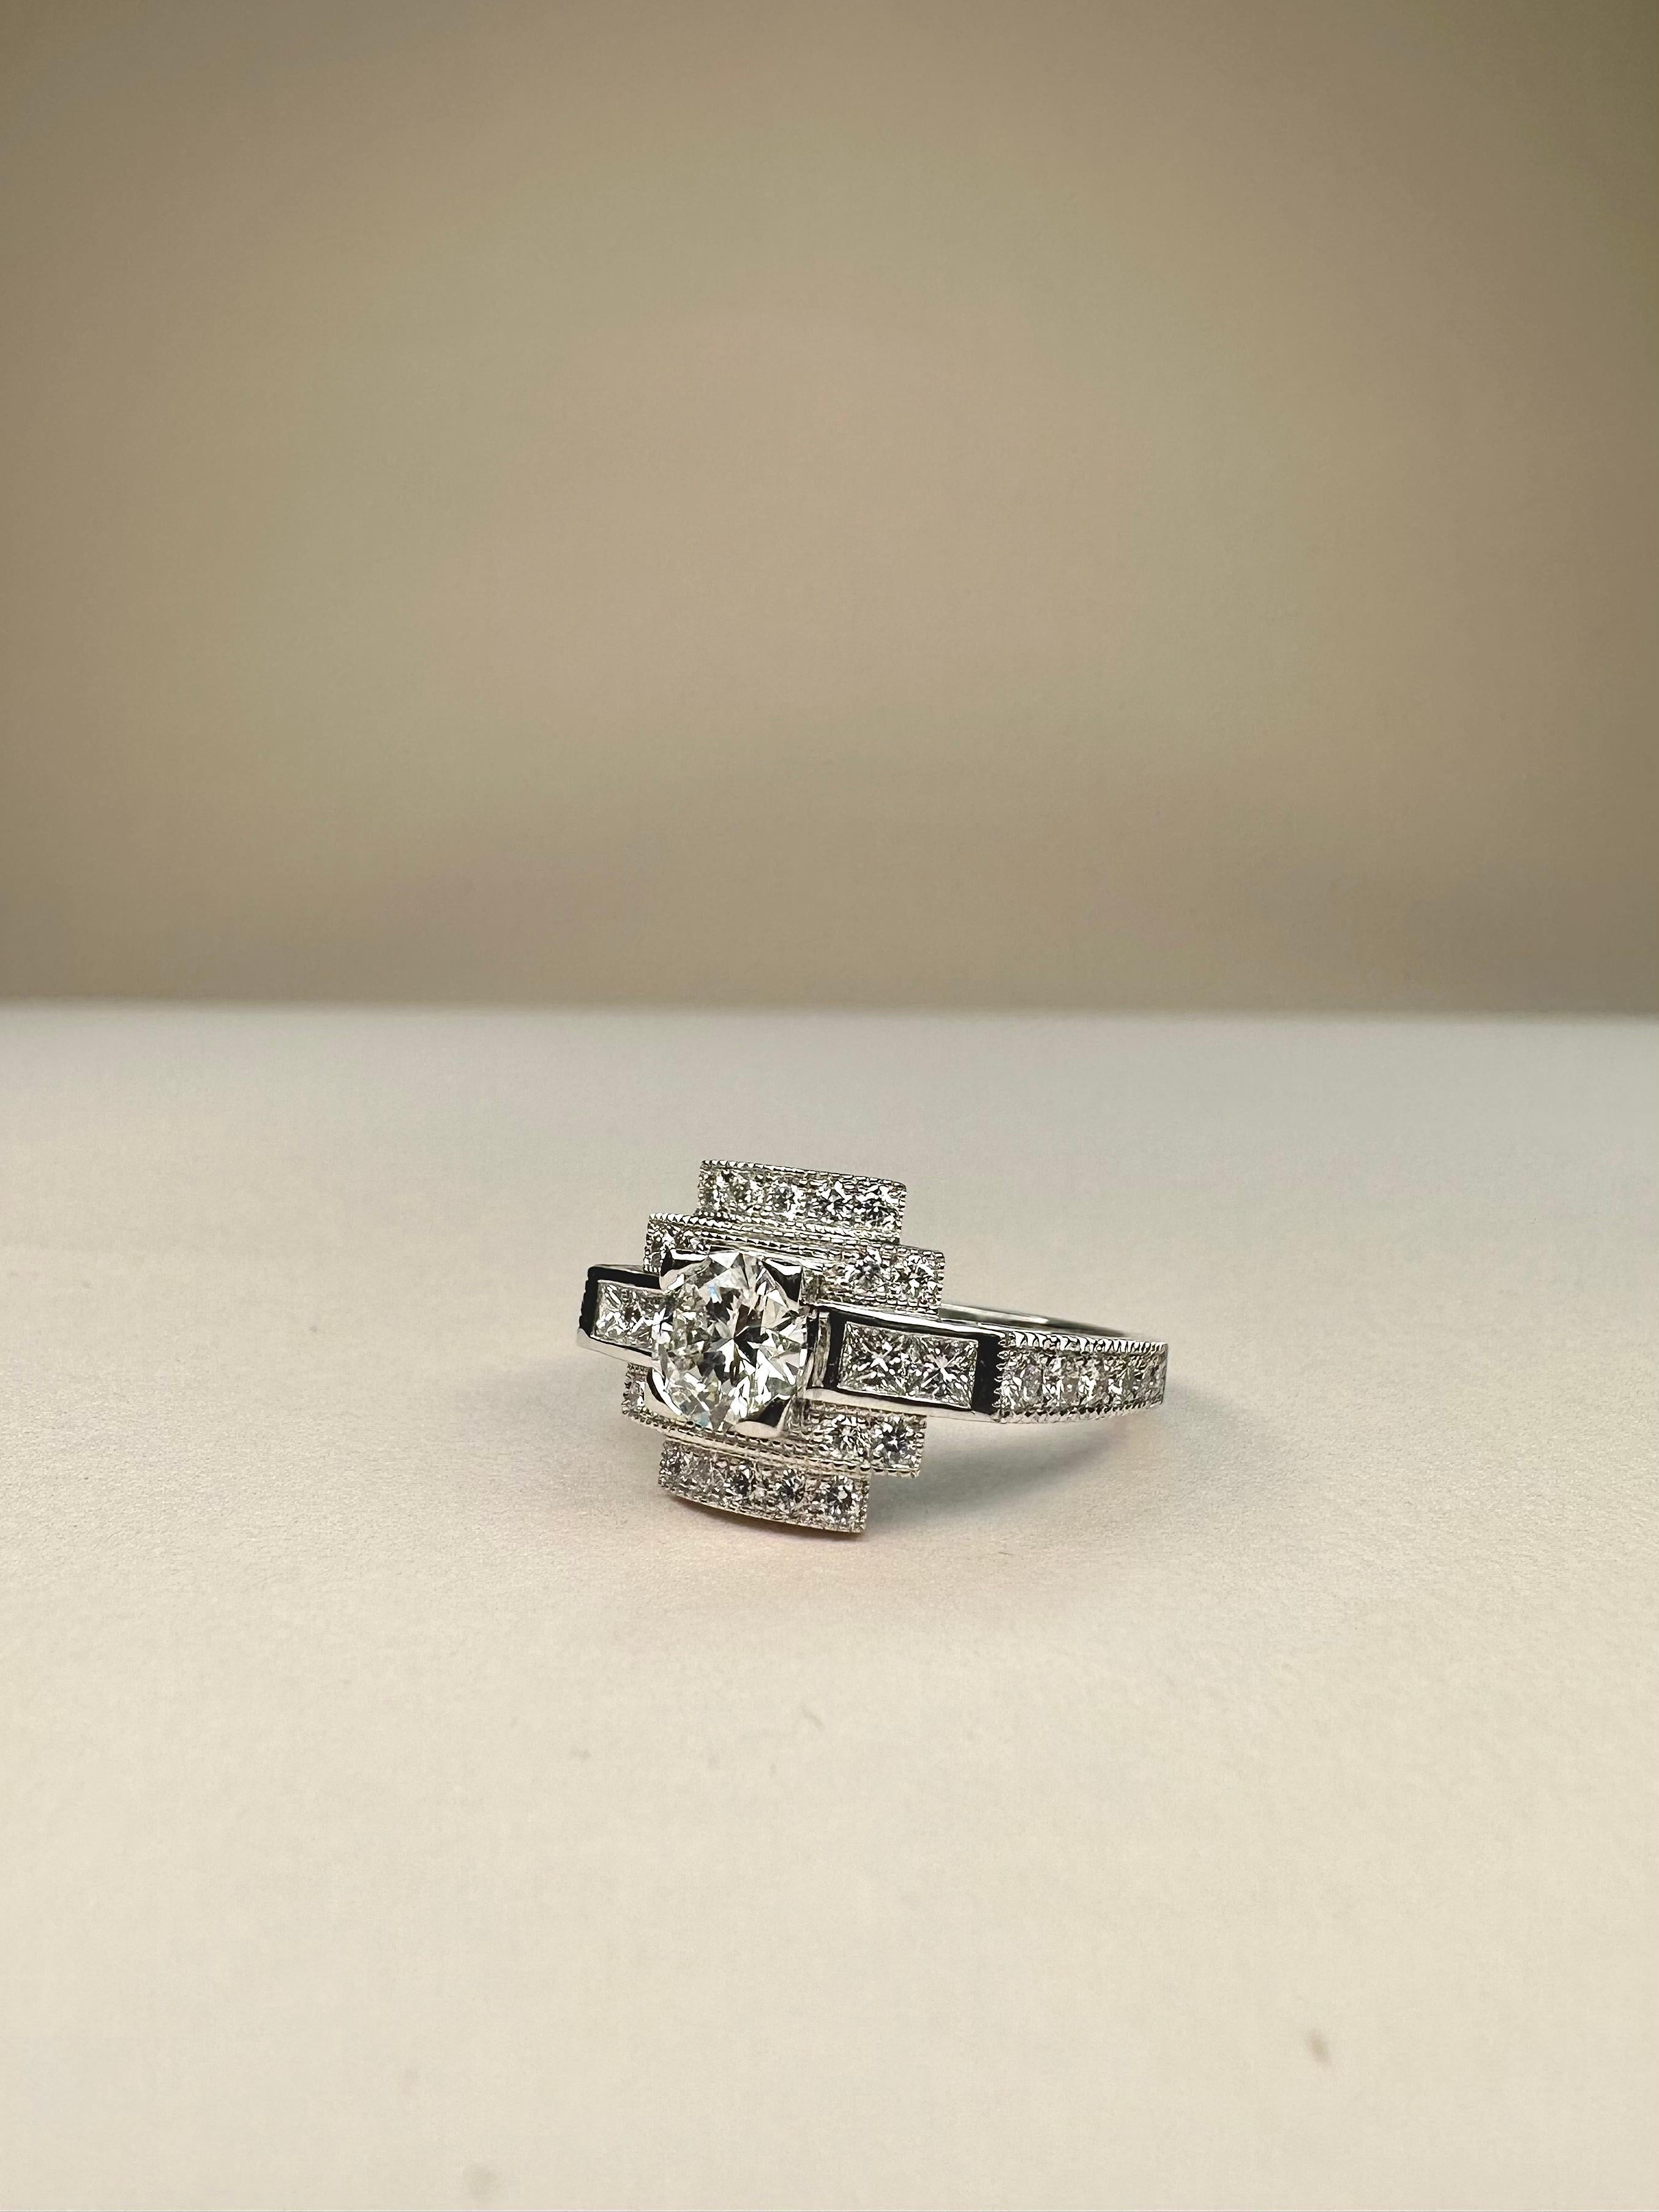 For Sale:  18k White Gold 0.7 Ct Diamond Art Deco Ring set with 0, 65 Cts of Diamonds 3